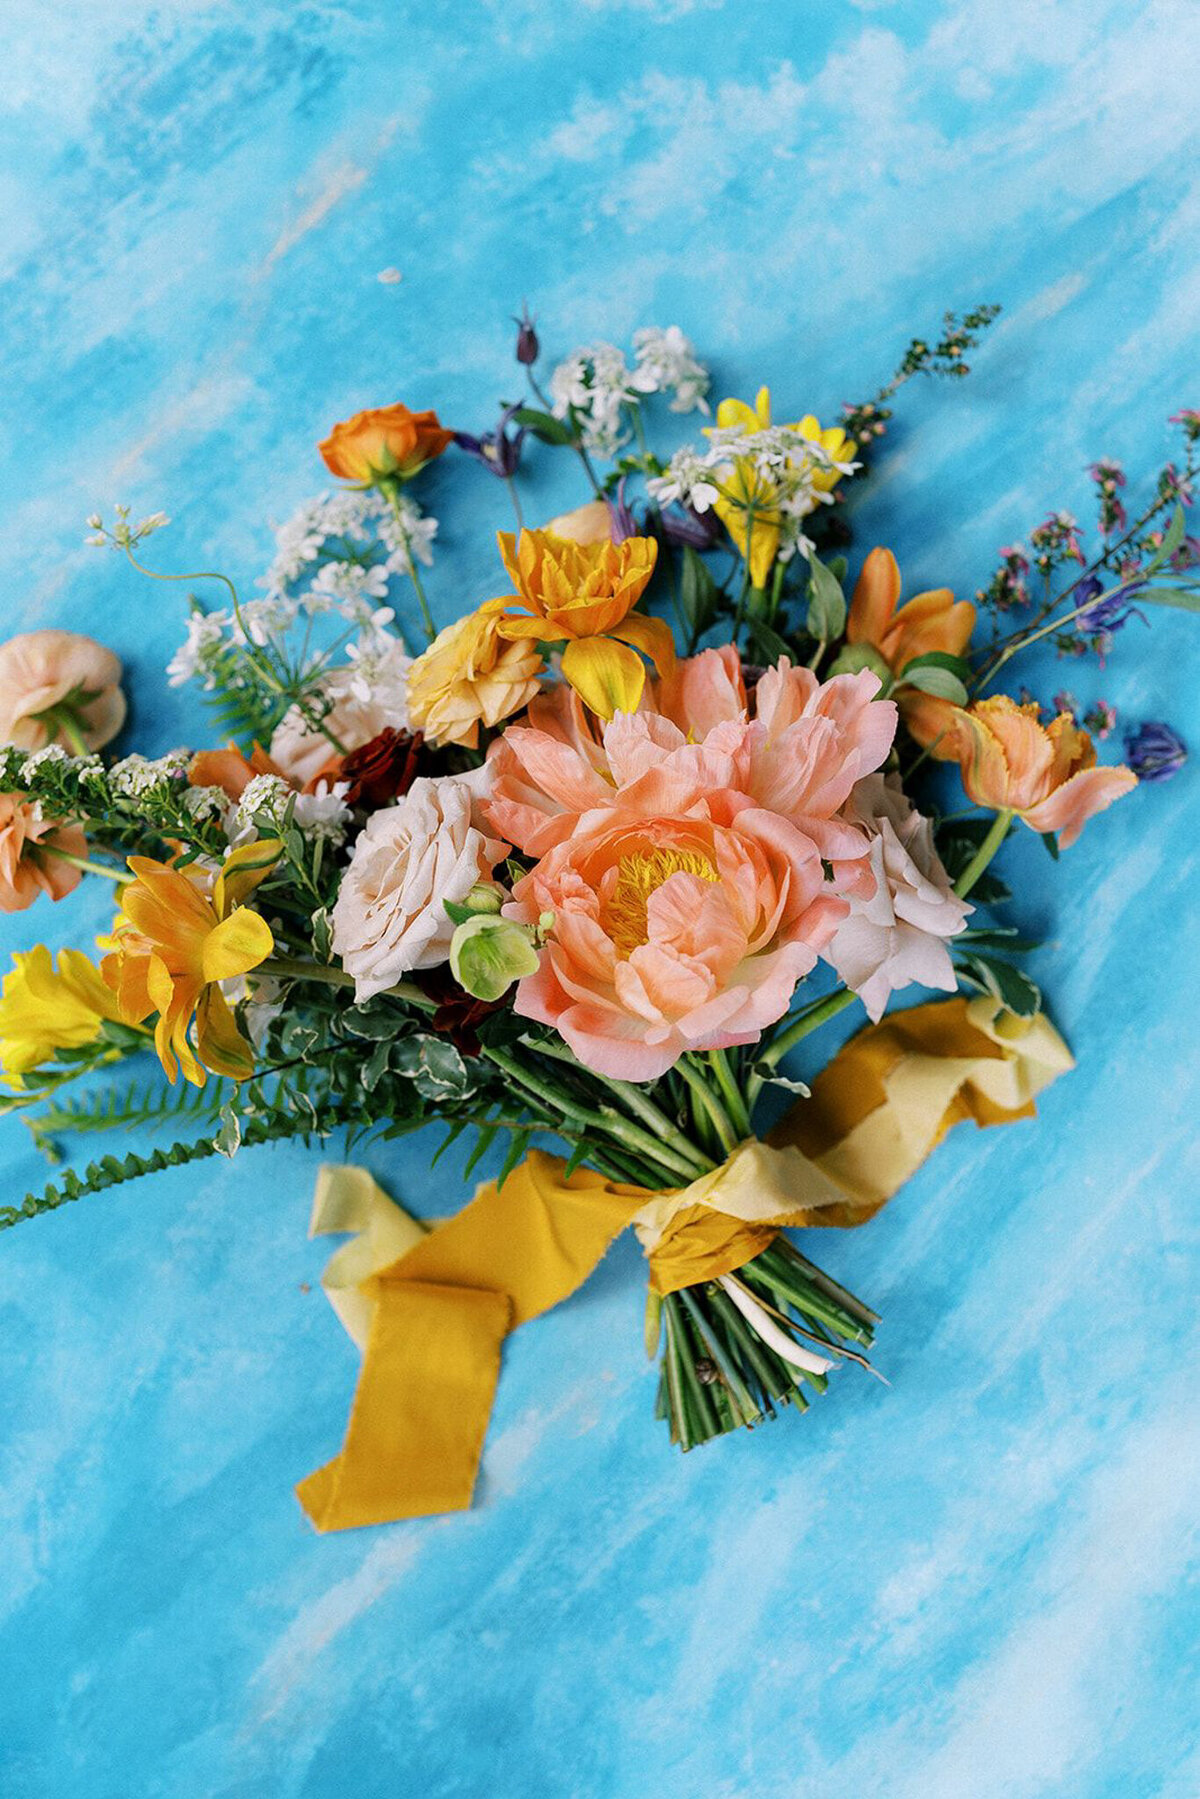 Bright and colourful spring inspired bridal bouquet by Hue Florals, artistic Calgary, Alberta wedding florist, featured on the Brontë Bride Vendor Guide.